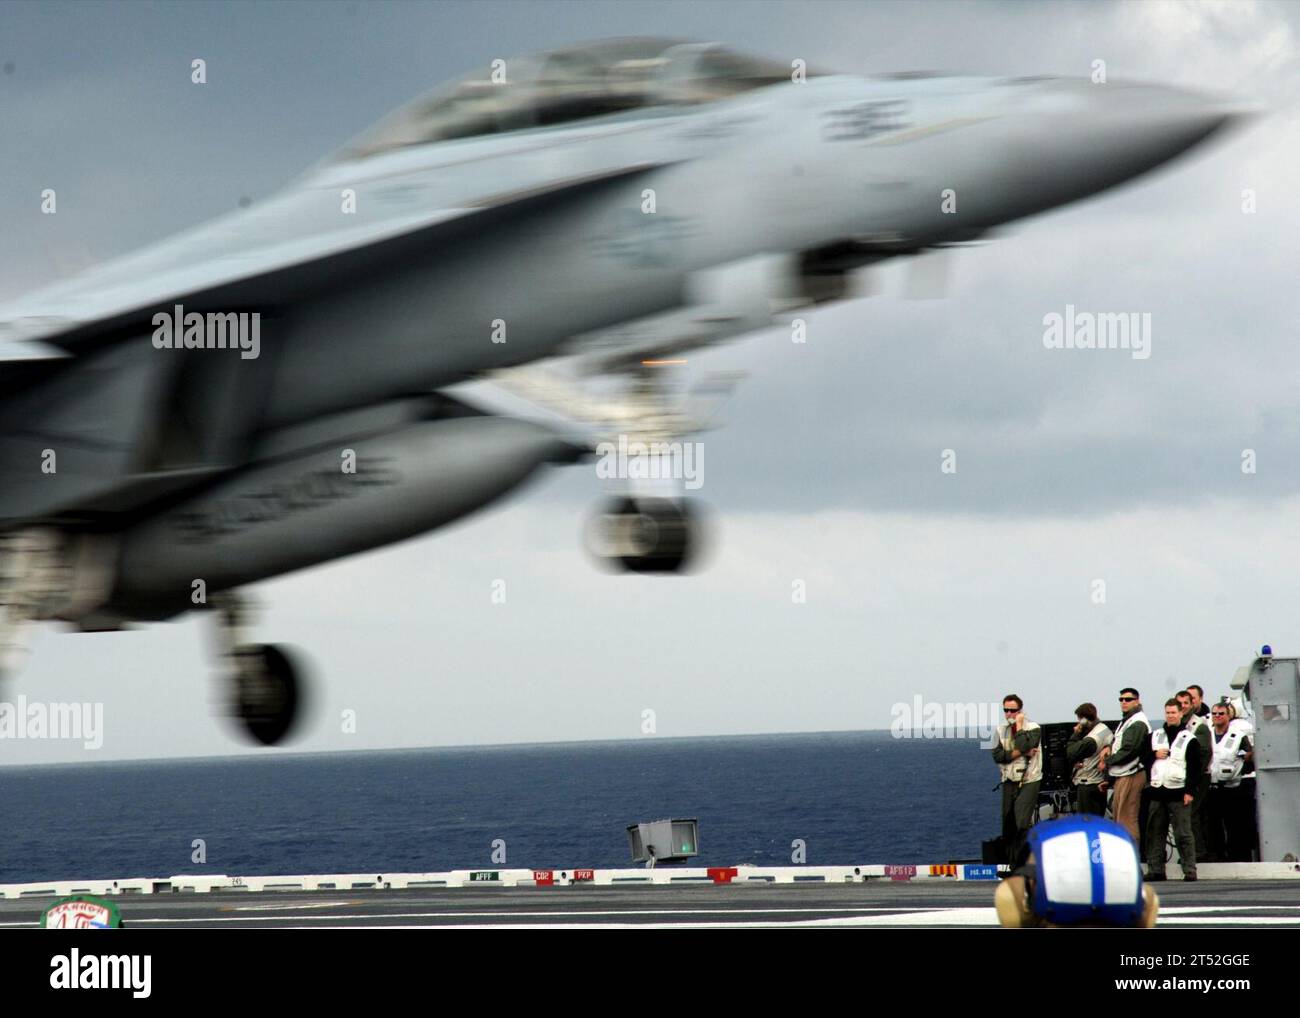 1005197908T-207 ATLANTIC OCEAN (May 19, 2010) Landing signal officers aboard the aircraft carrier USS George H.W. Bush (CVN 77) watch as a F/A-18F Super Hornet assigned to Strike Fighter Squadron (VFA) 213 lands. George H.W. Bush is underway in the Atlantic Ocean. Navy Stock Photo